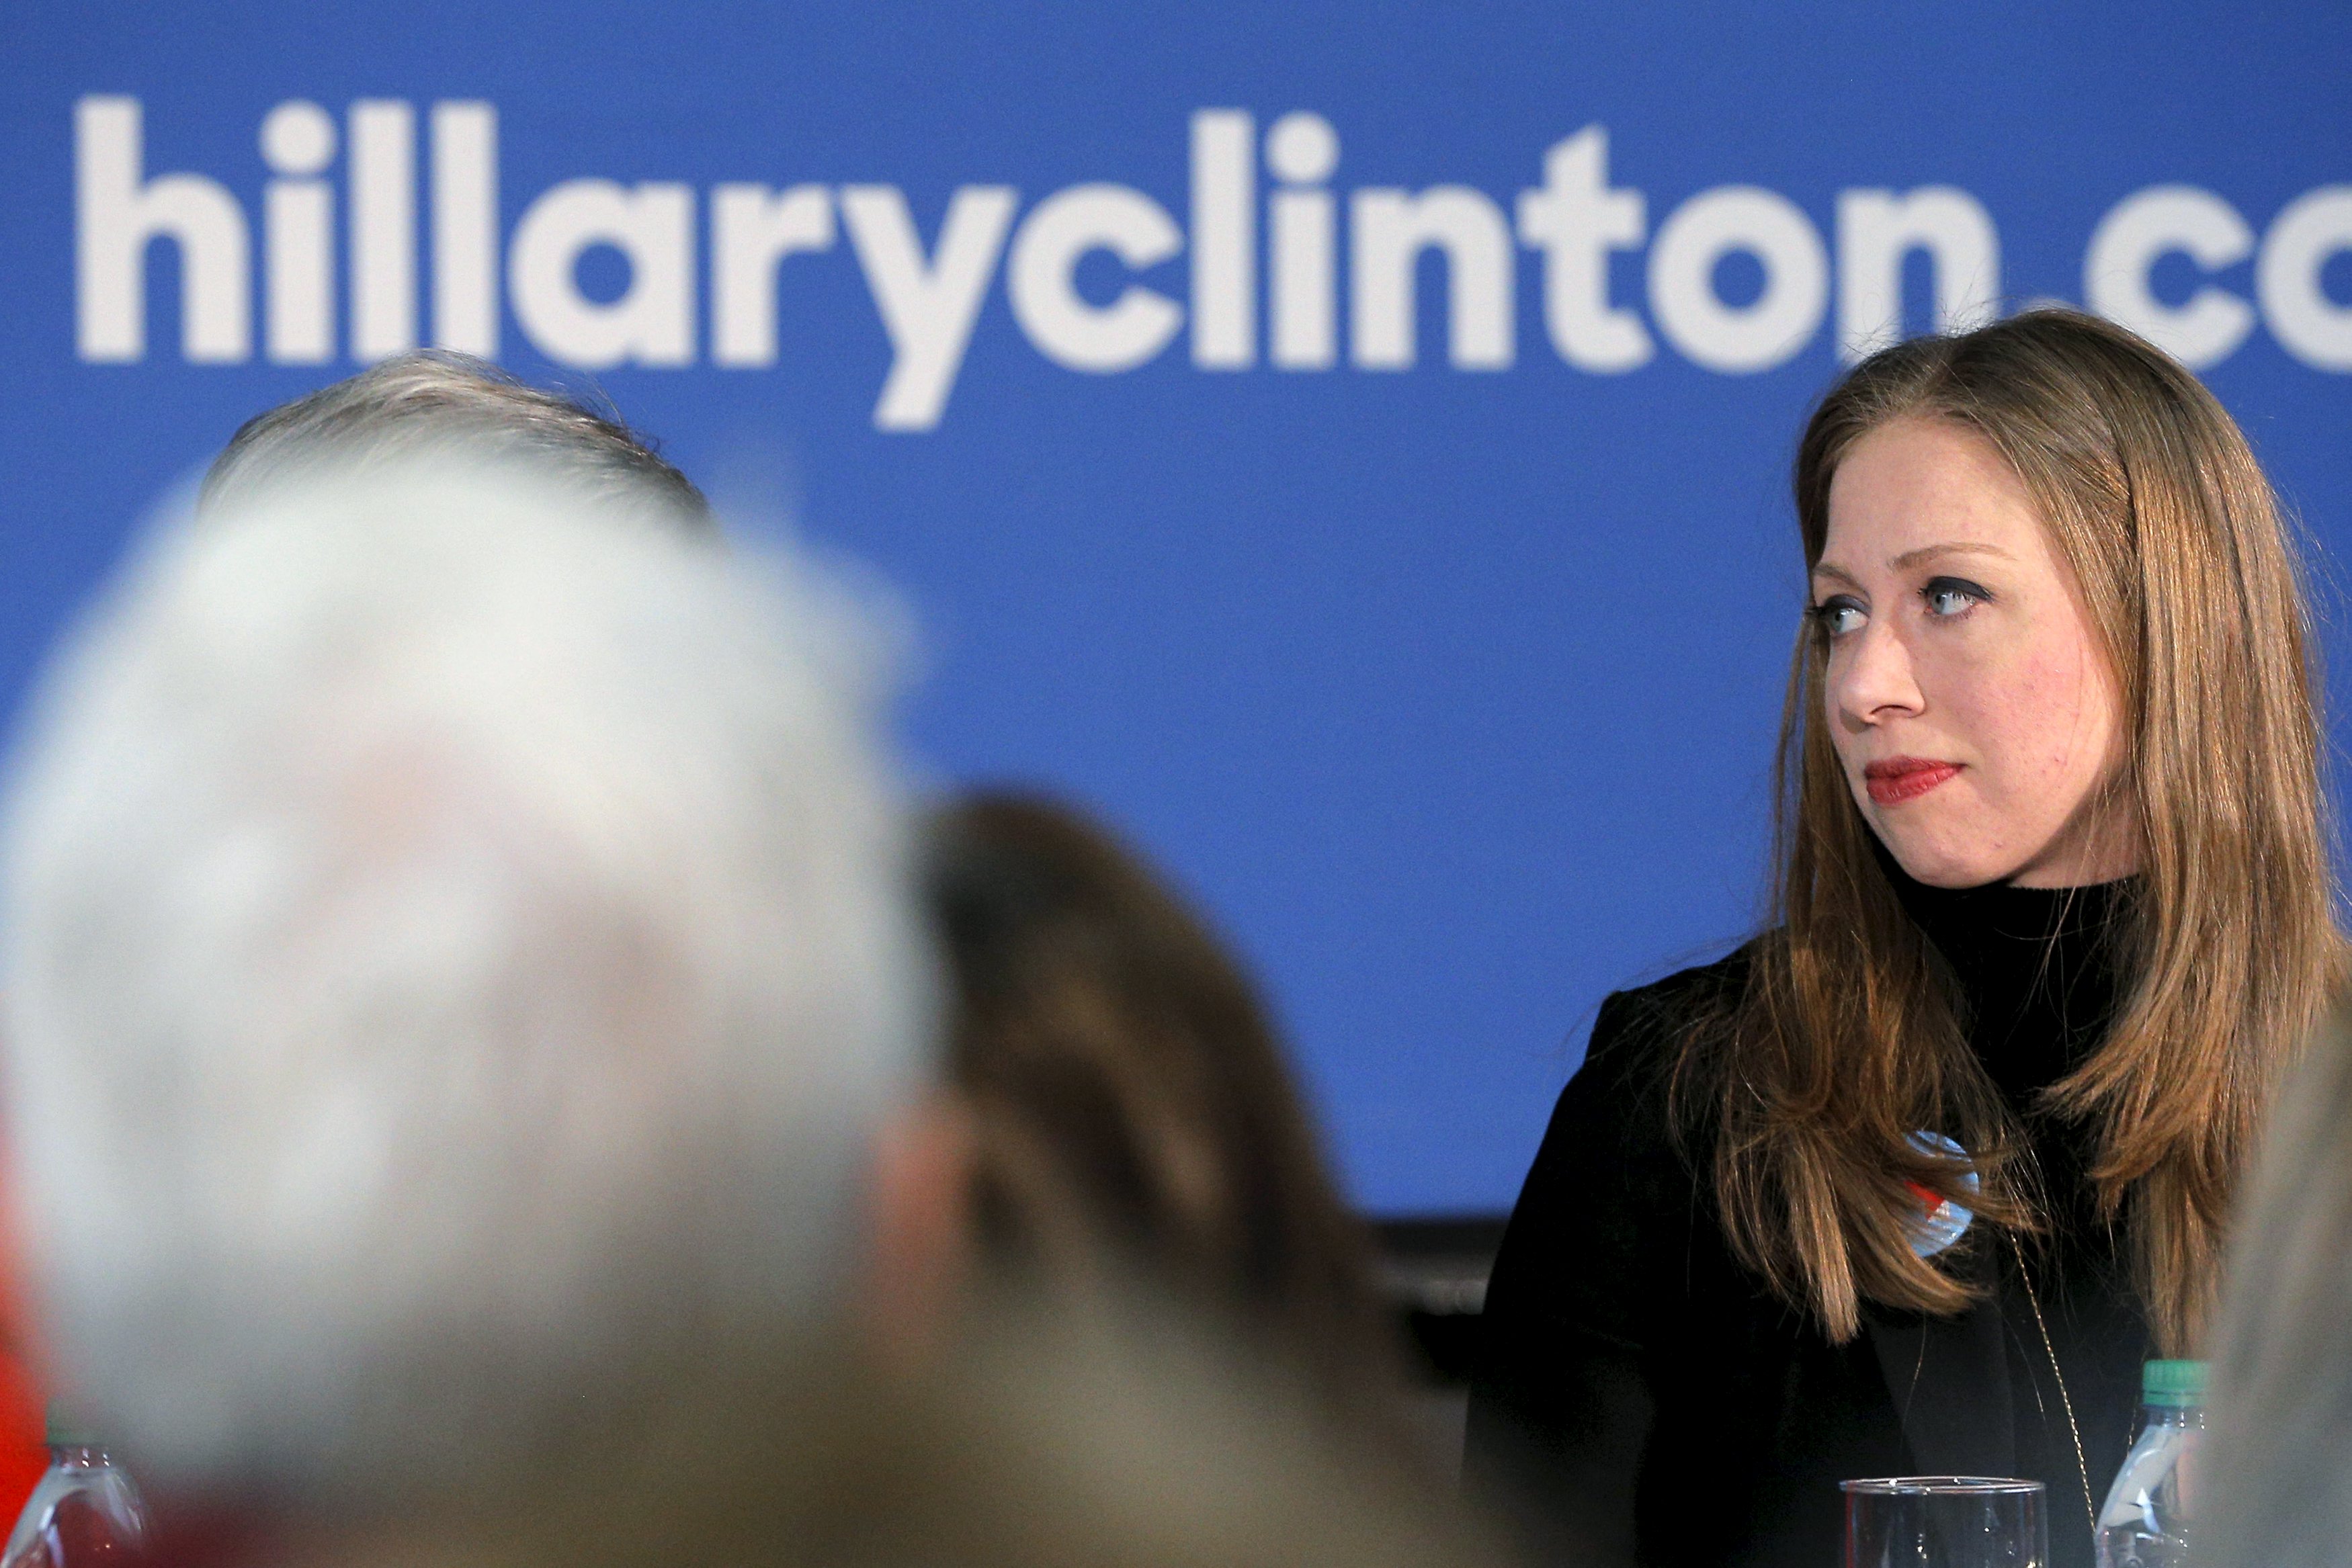 Chelsea Clinton goes on the attack after Bernie Sanders - CBS News